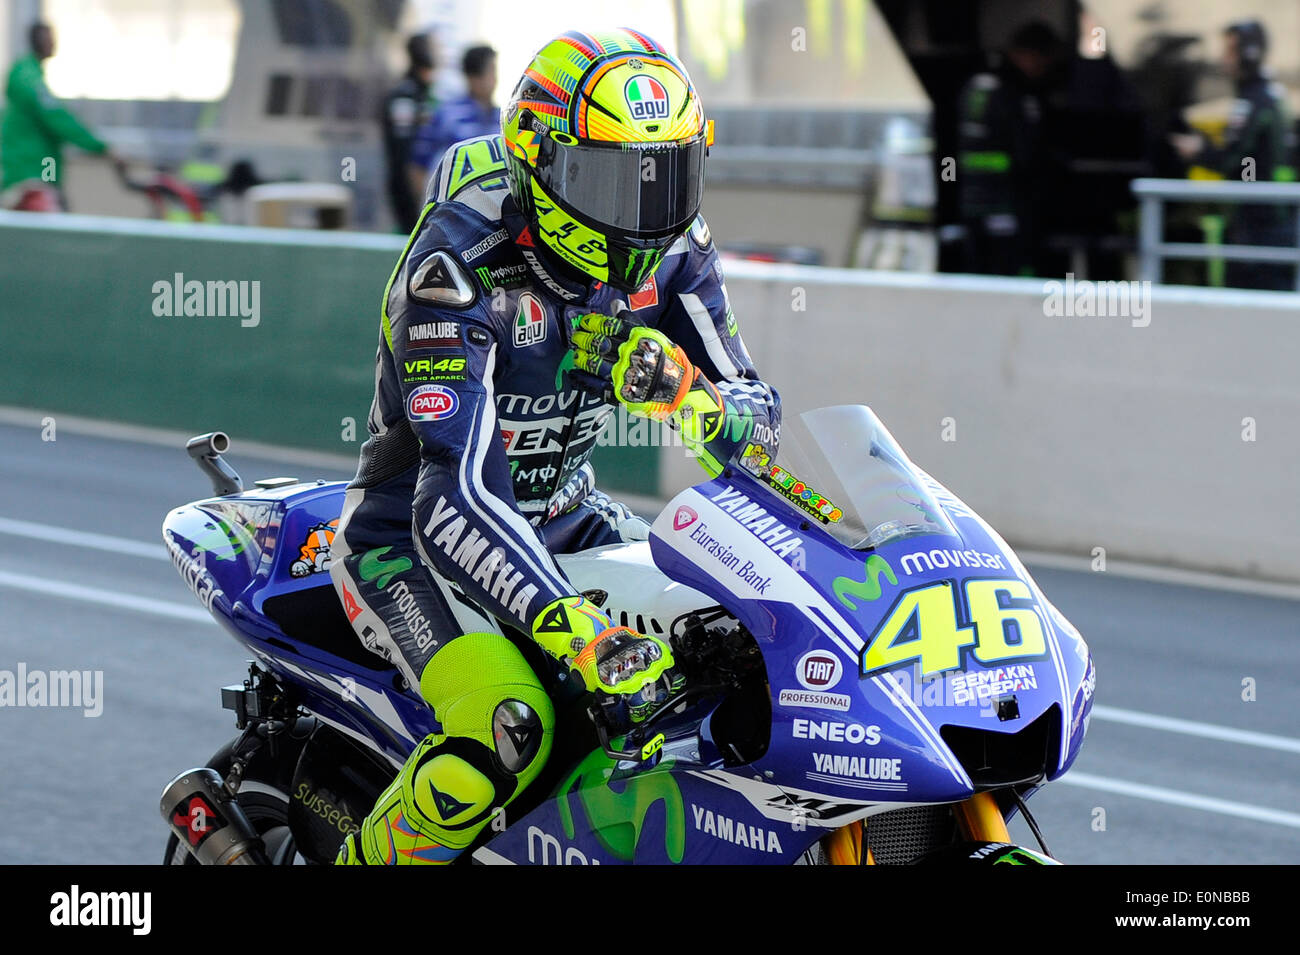 Valentino Rossi (Movistar Yamaha in the practice sessions at Bugatti circuit in Le Mans Stock Photo - Alamy